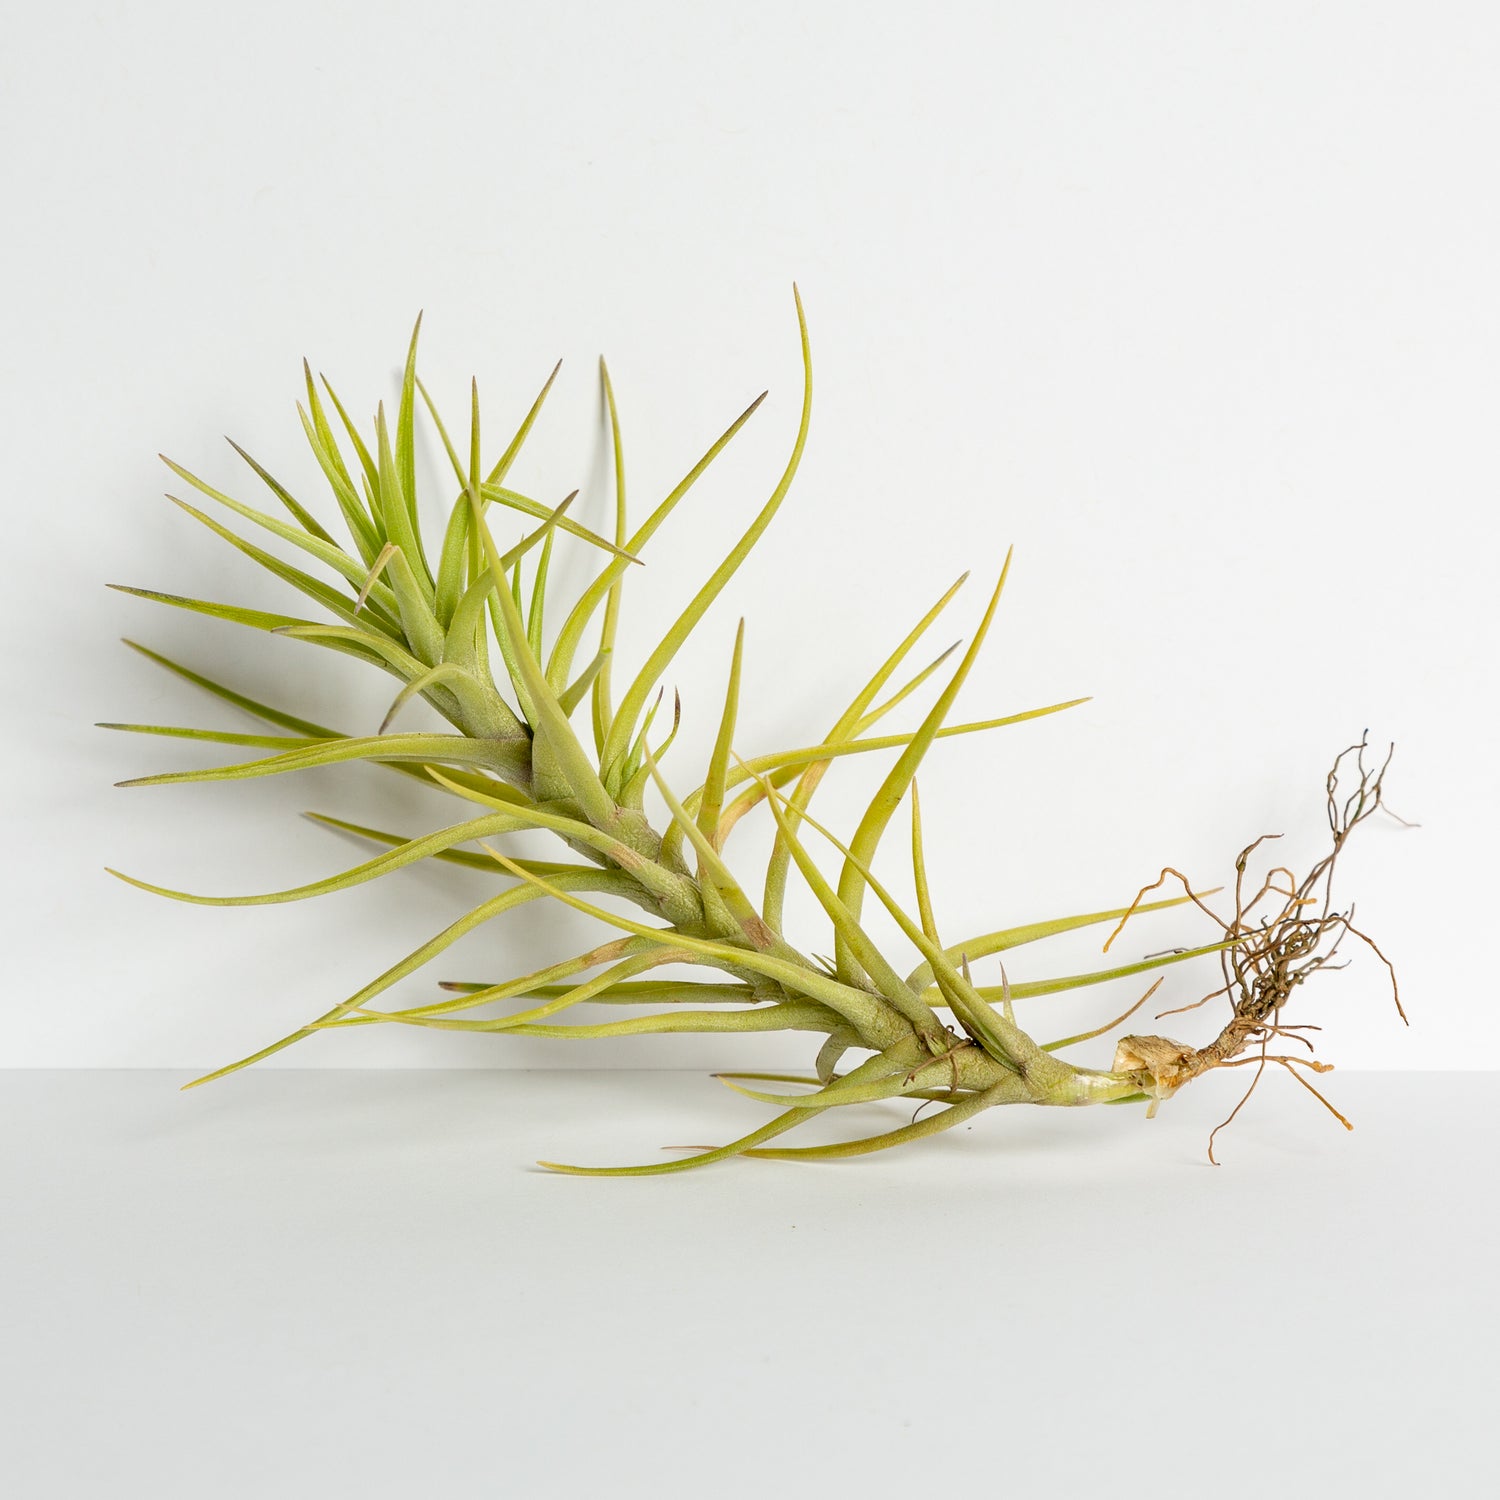 Air Plant 'Cocoensis' 2-4" - Urban Sprouts